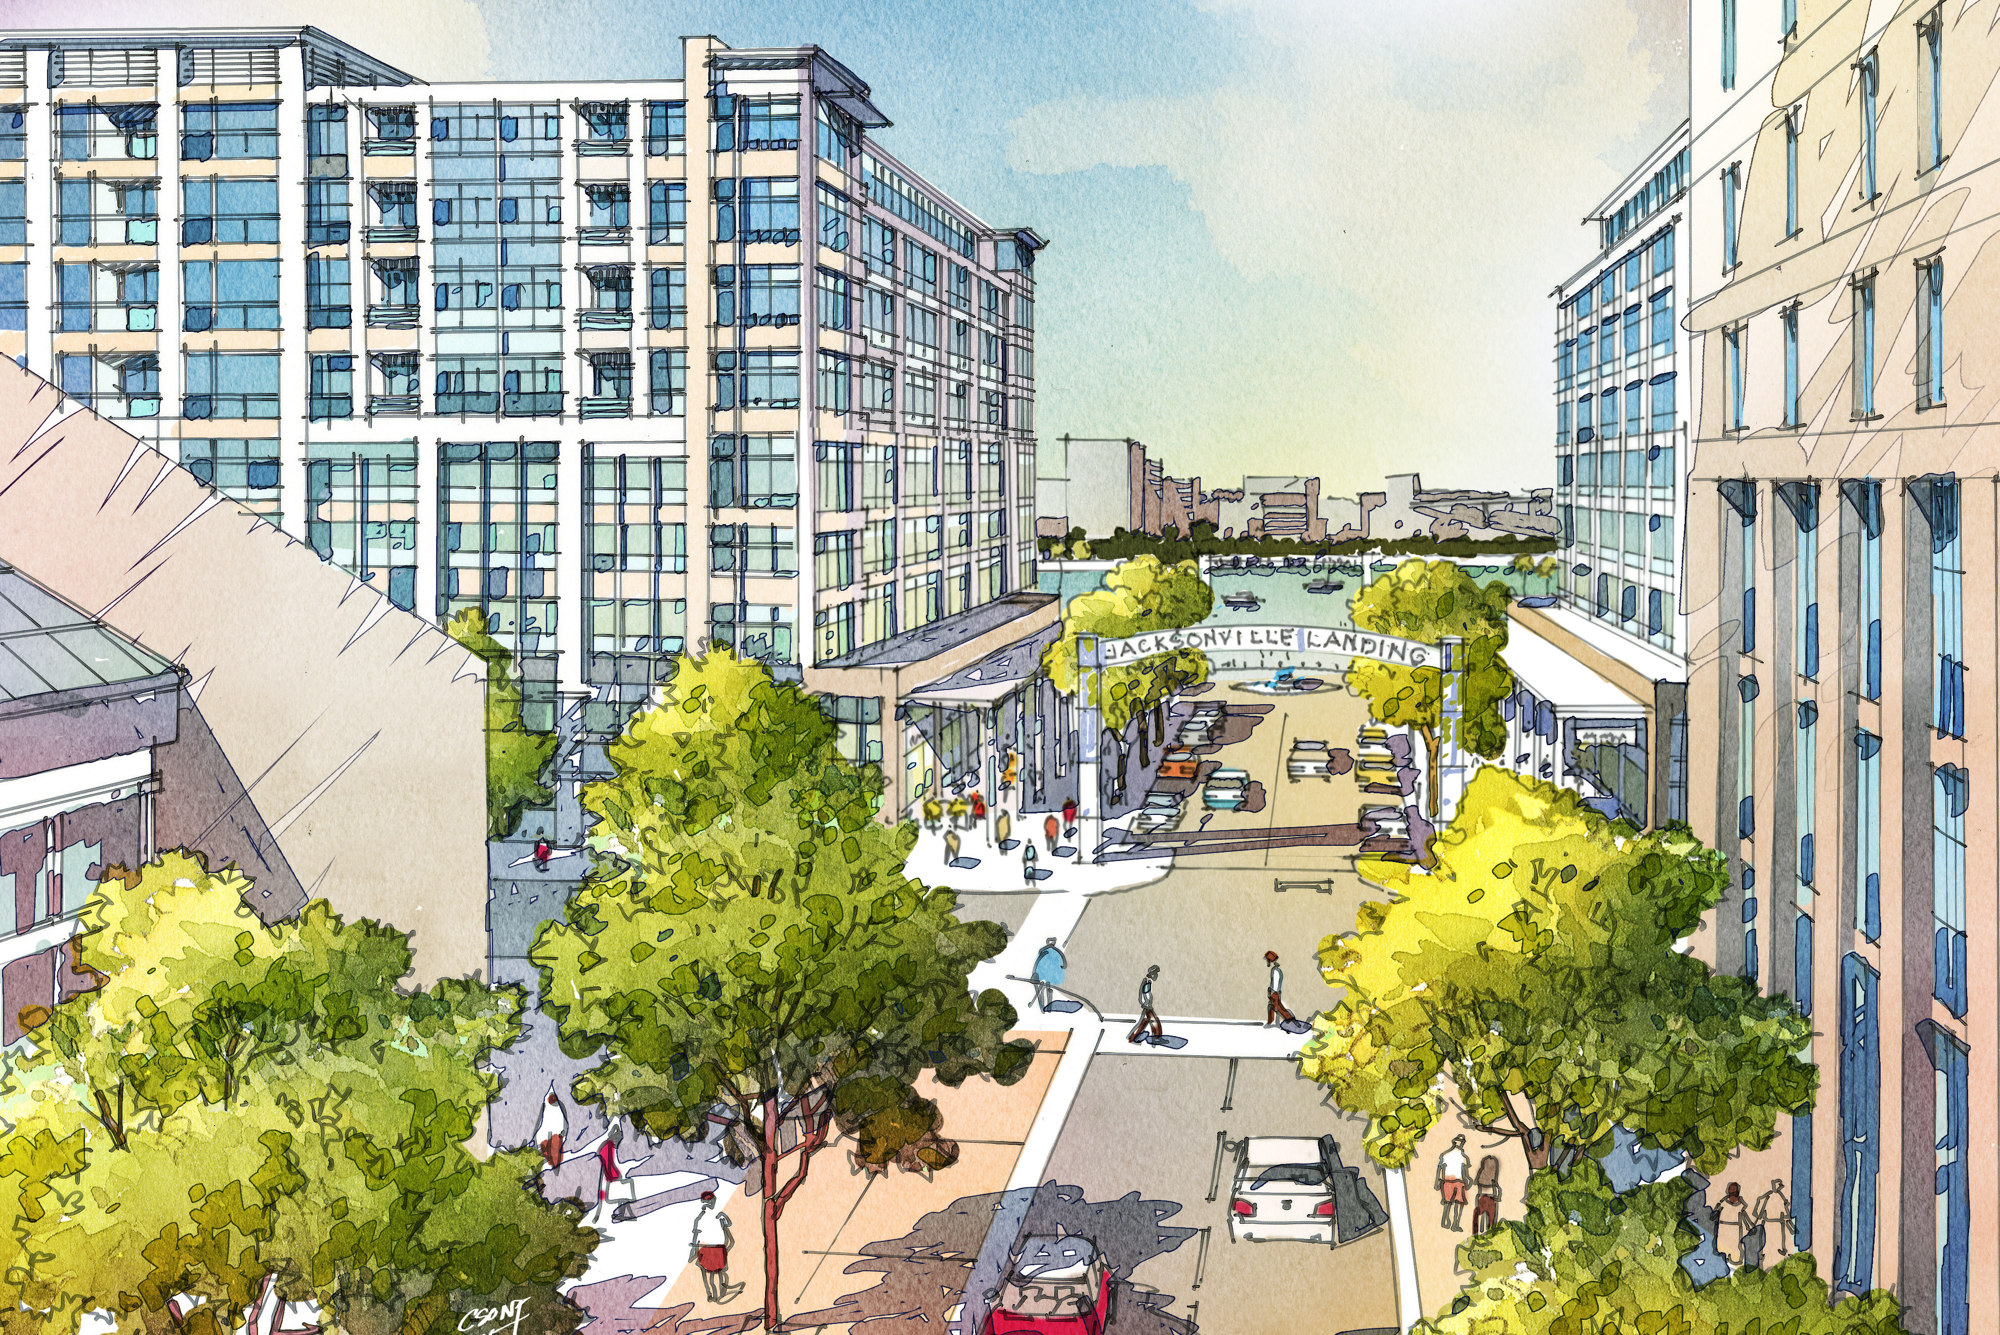 The entrance to a new Jacksonville Landing is shown in this rendering from 2015.